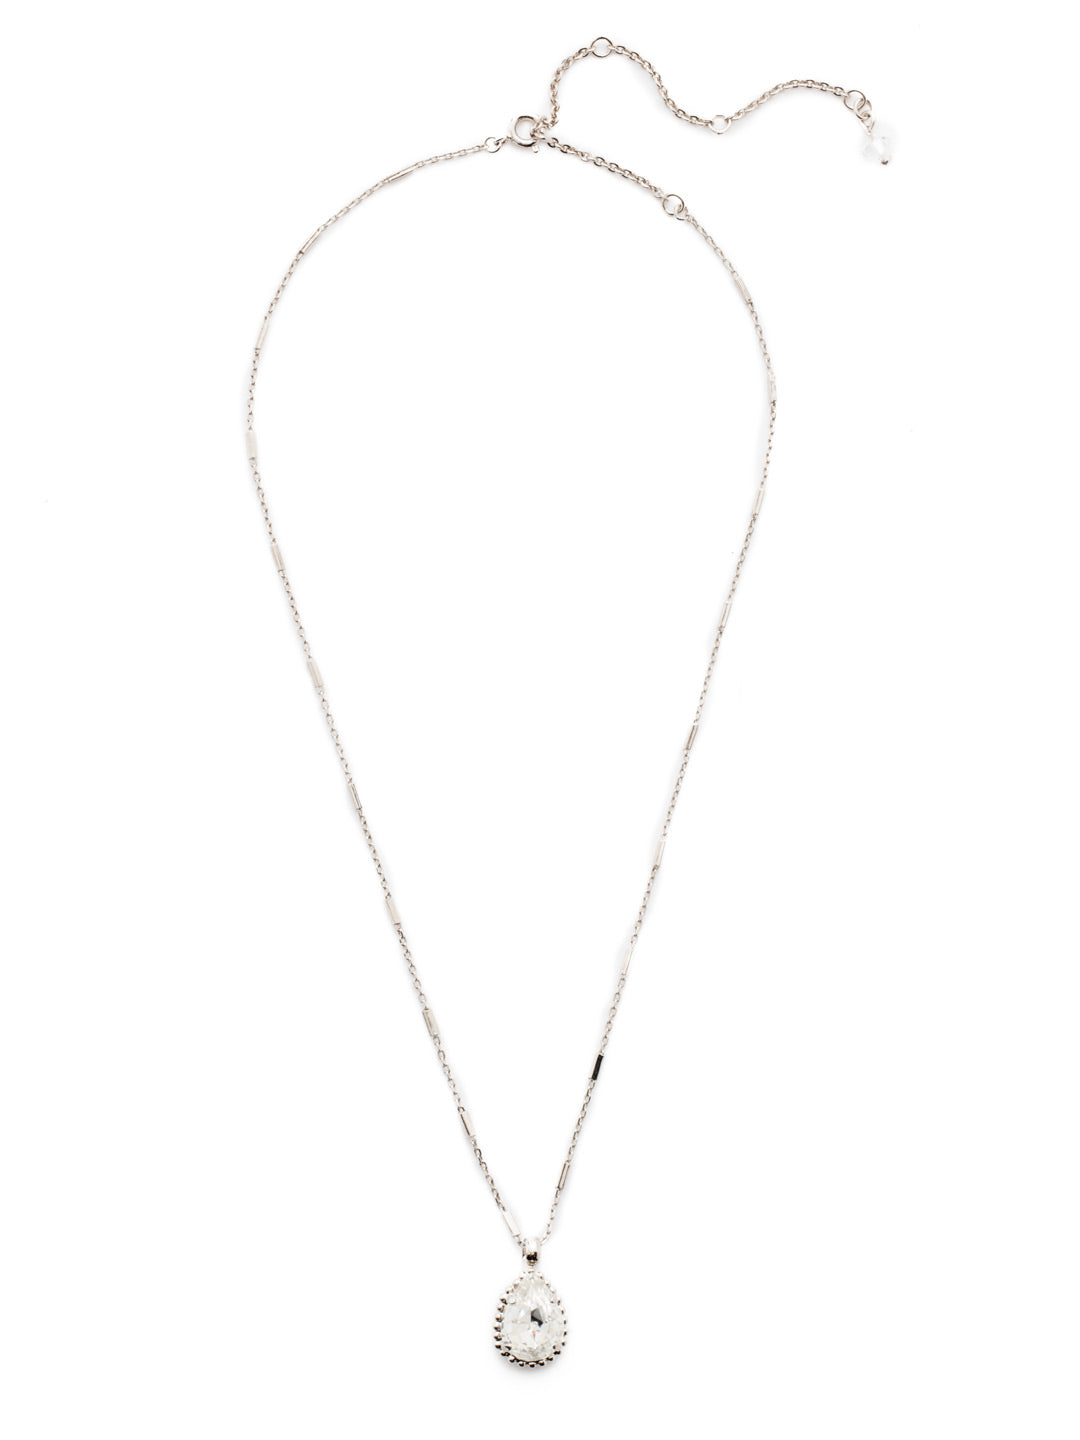 Chanel Large Silver Crystal Logo Pendant Necklace